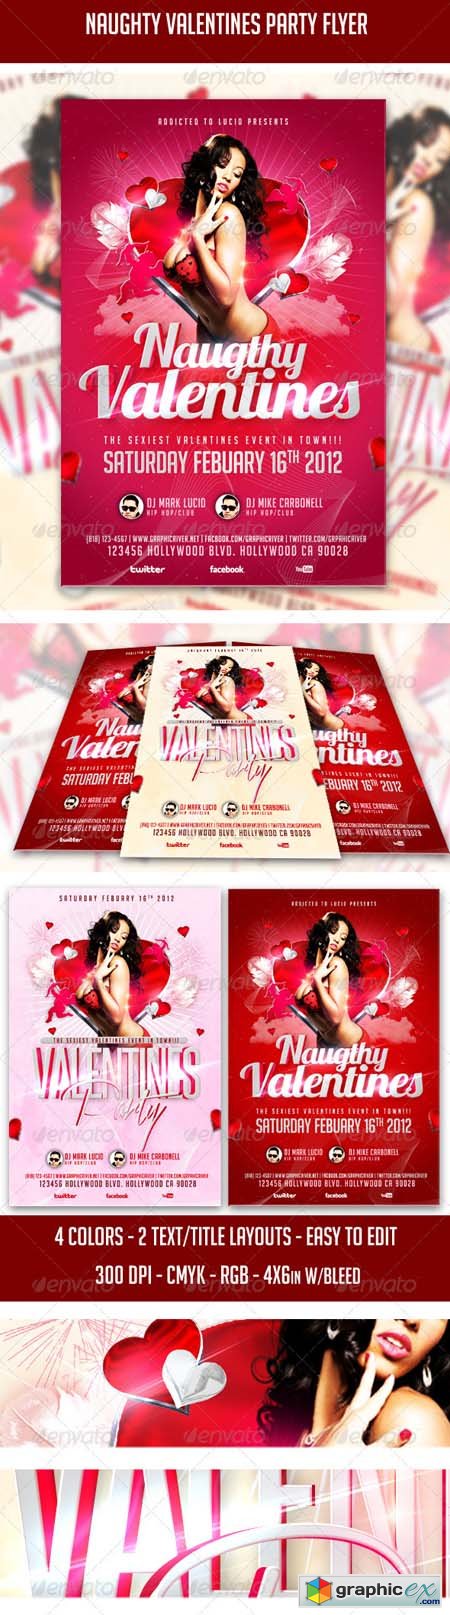 Naughty Valentines Party flyer 3777247